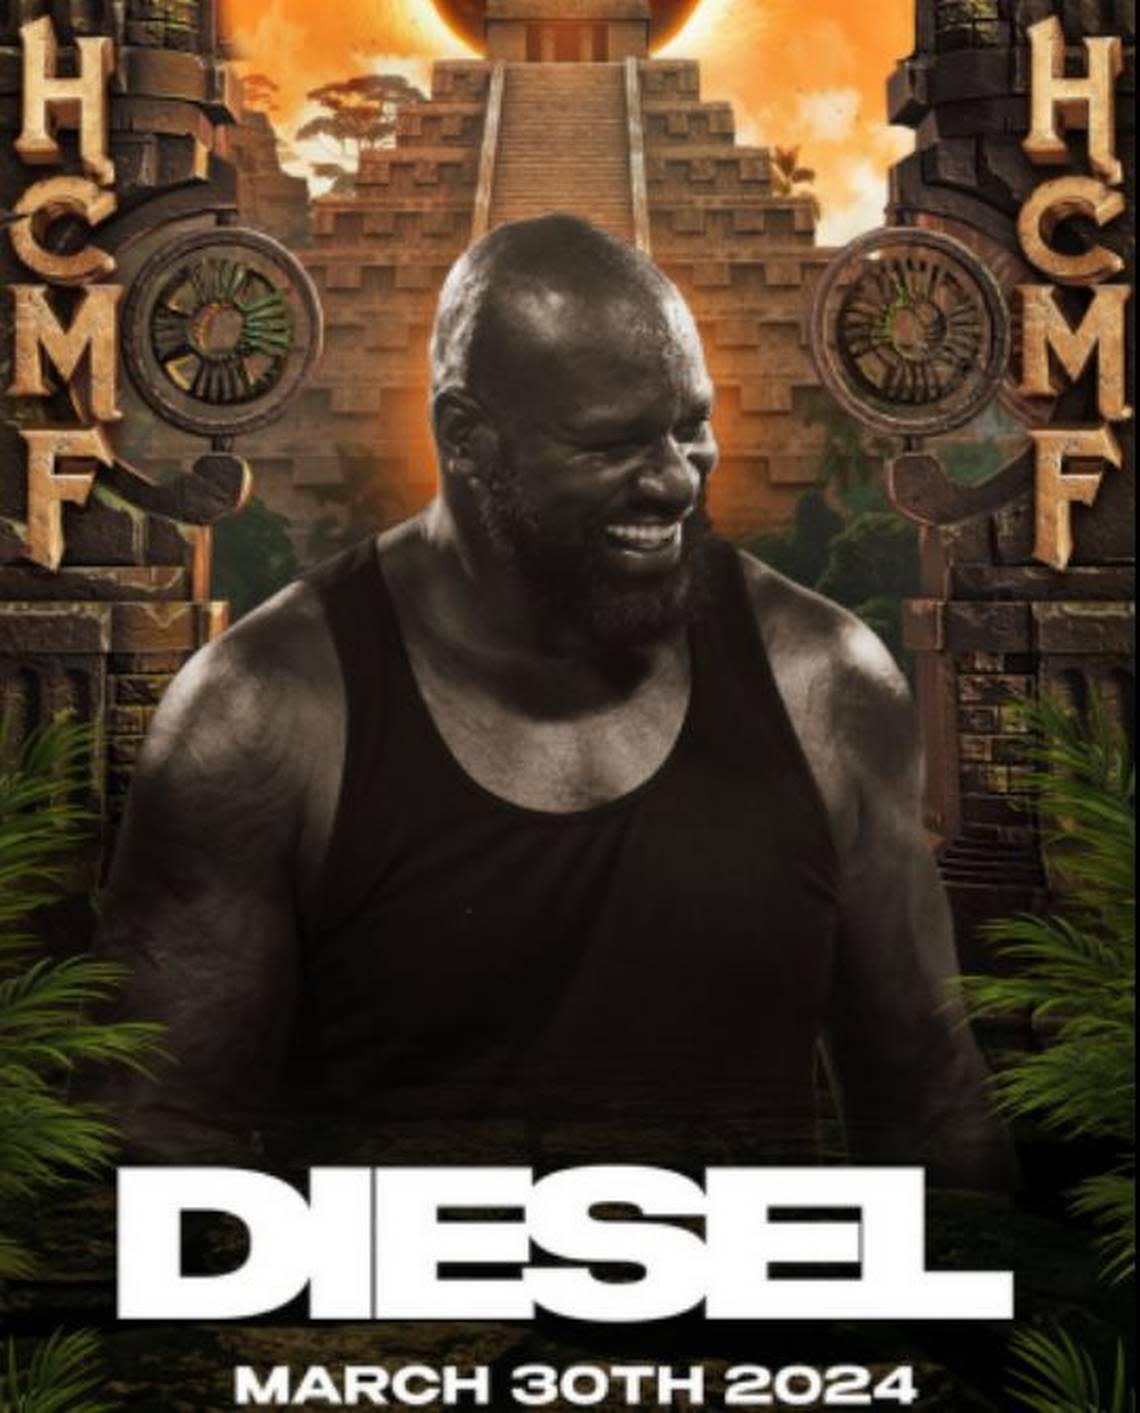 Shaquille O’Neal, aka Shaq, is billed as Diesel and will be the headline performer at the Hidden City Music Festival at Historic Columbia Speedway.